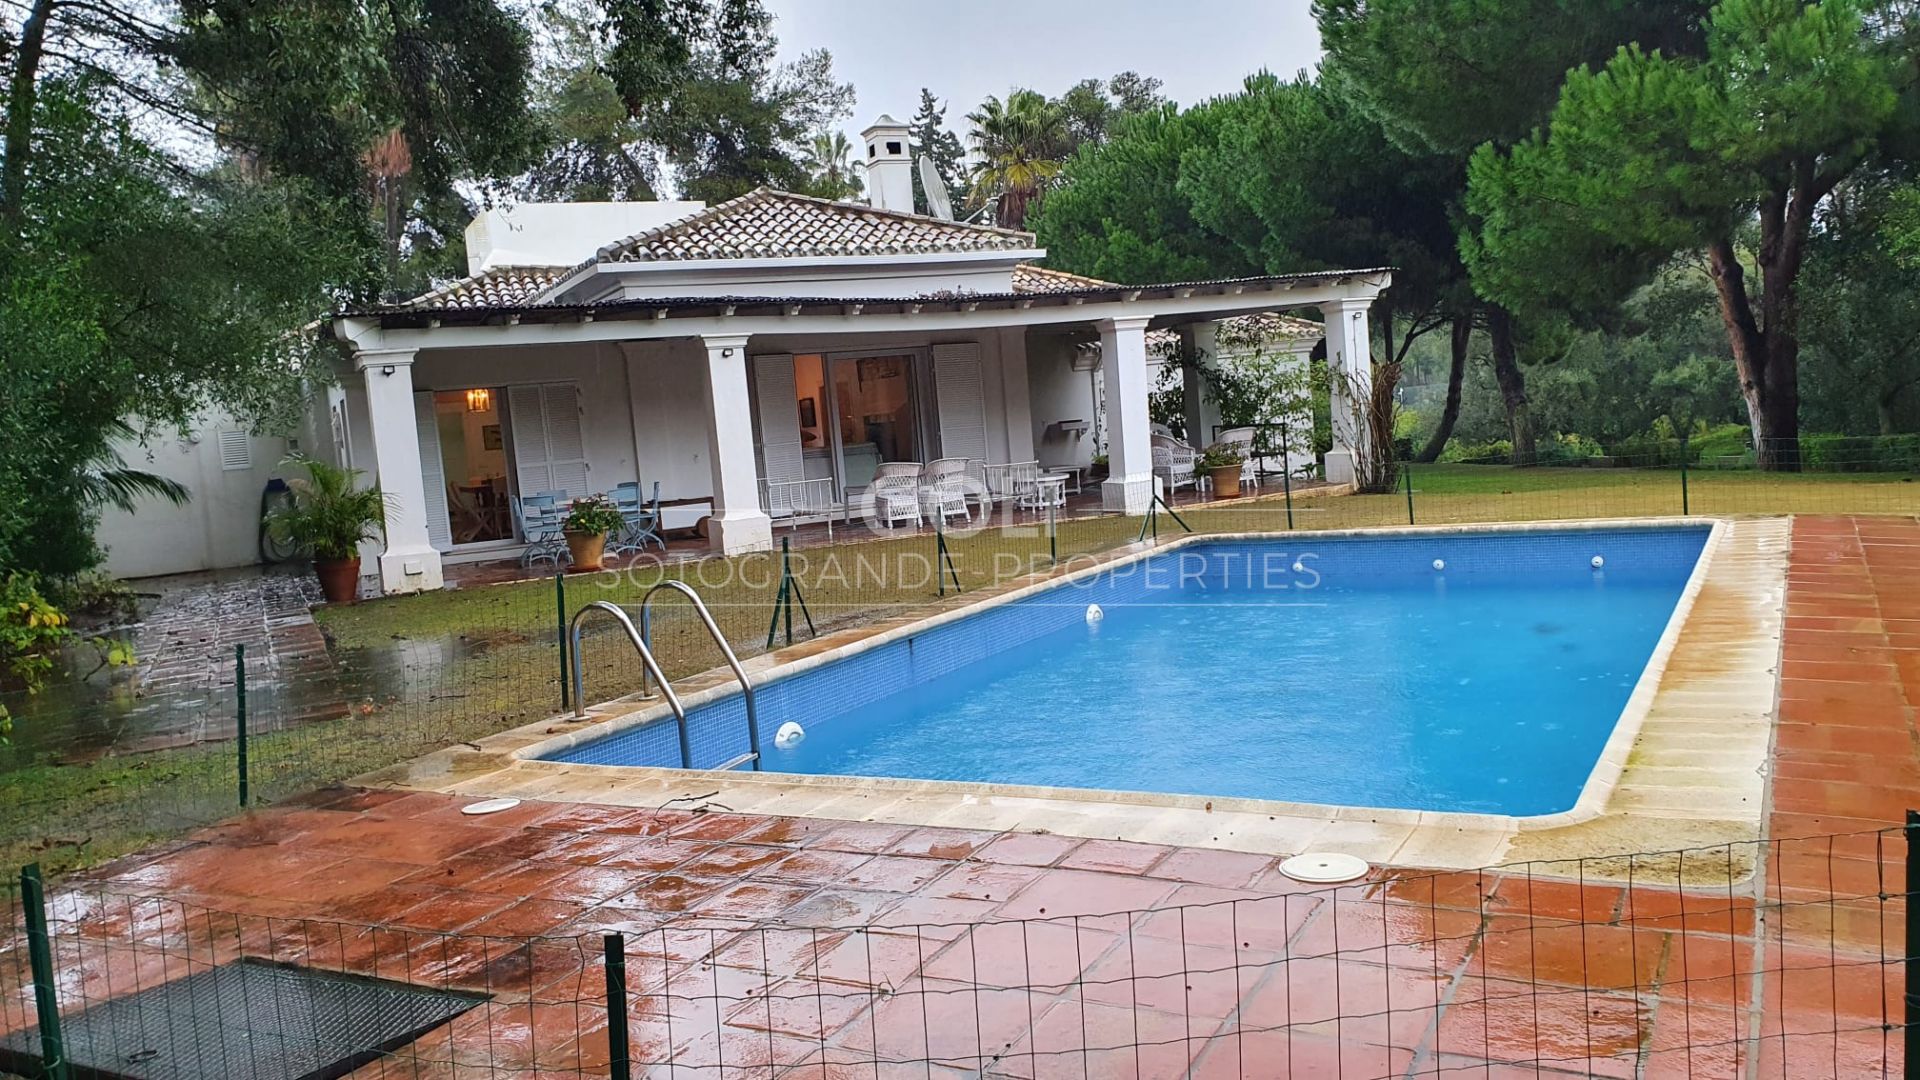 A Zone - Forest house in Lower Sotogrande